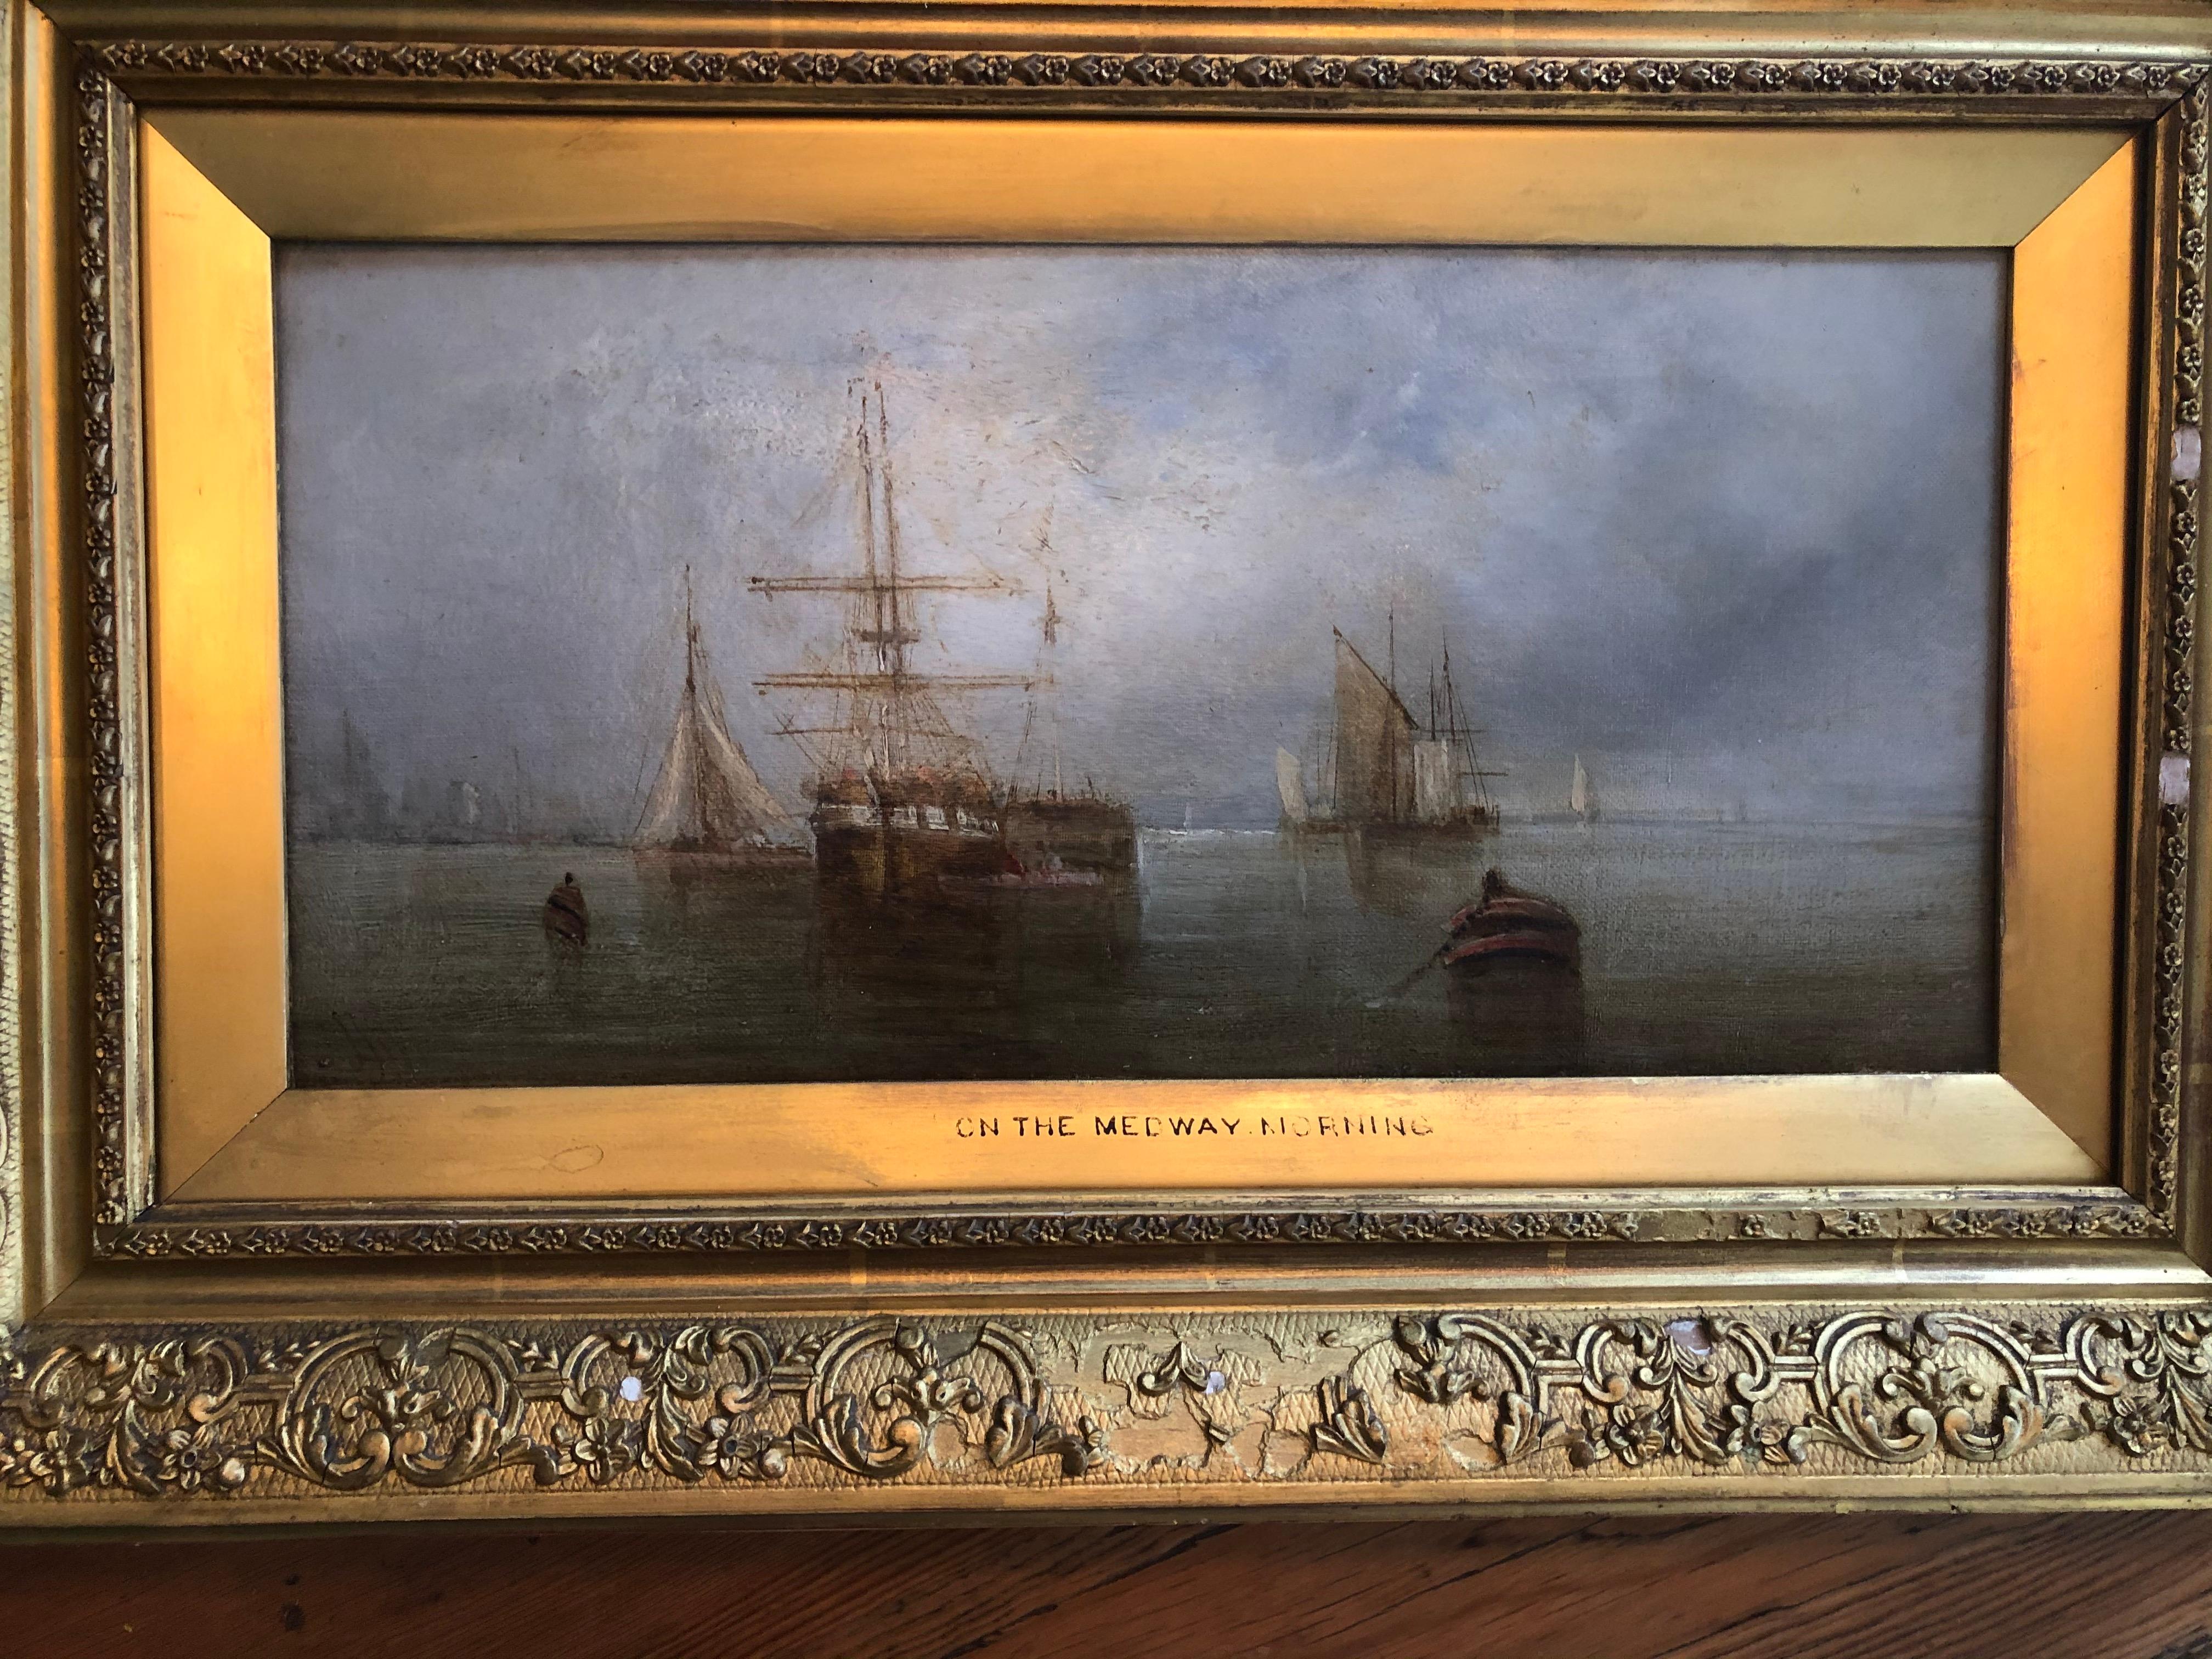 Unknown Landscape Painting - 19th Century British "On the Medway. Morning"